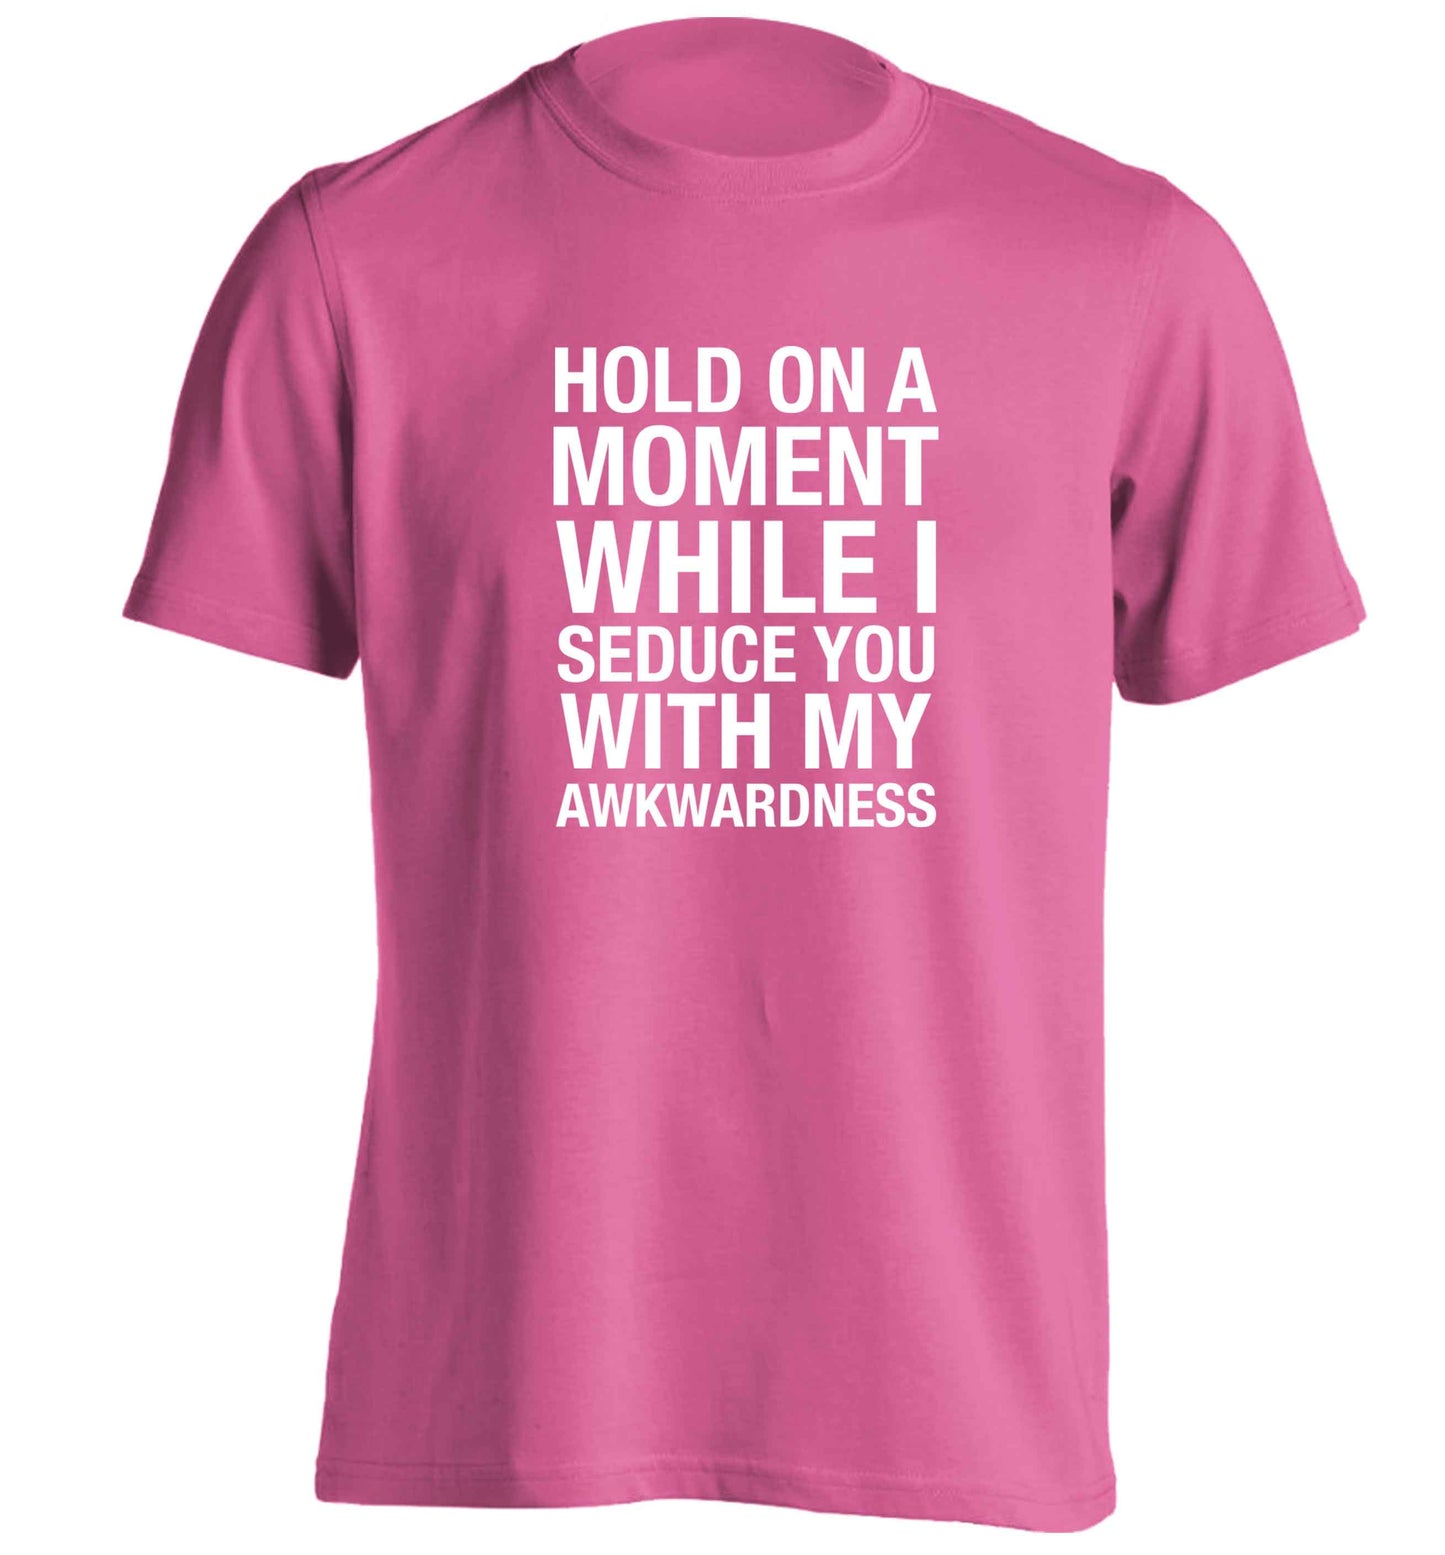 Hold on a moment while I seduce you with my awkwardness adults unisex pink Tshirt 2XL